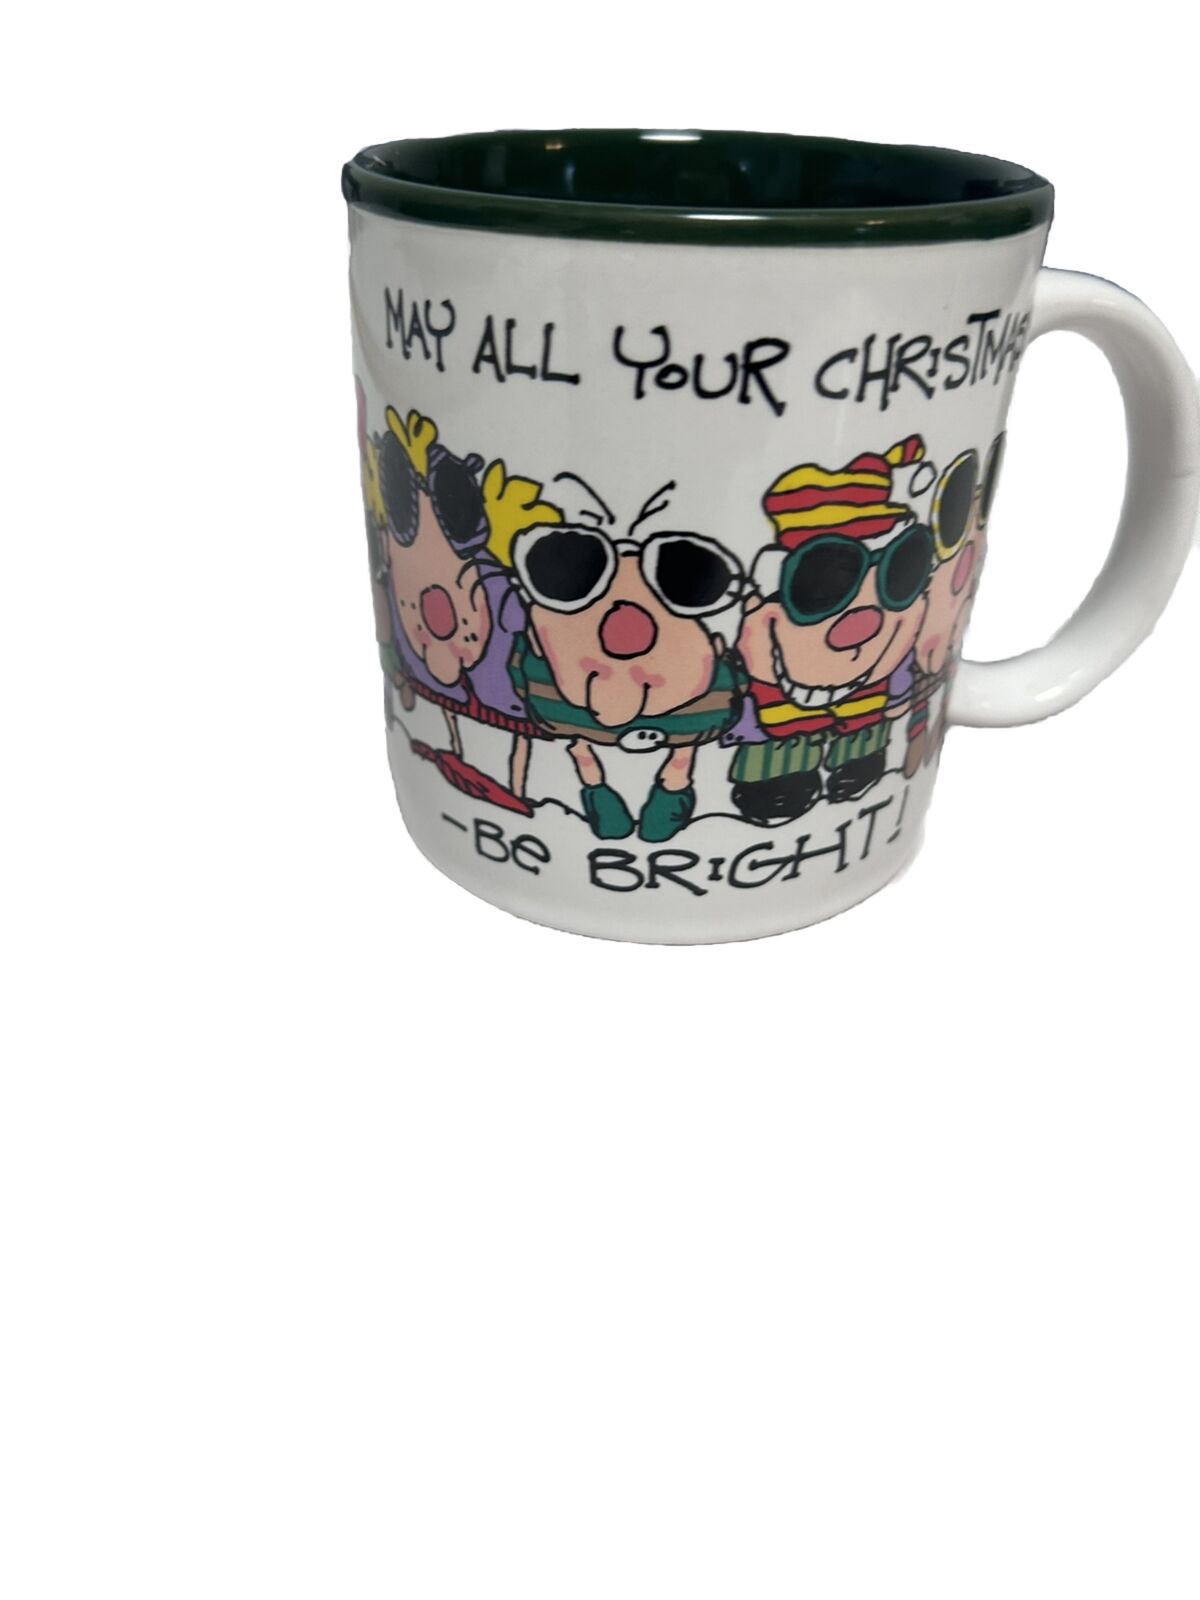 1987 Vintage by Dabagian Coffee Tea Mug Cup May All Your Christmases Be Bright